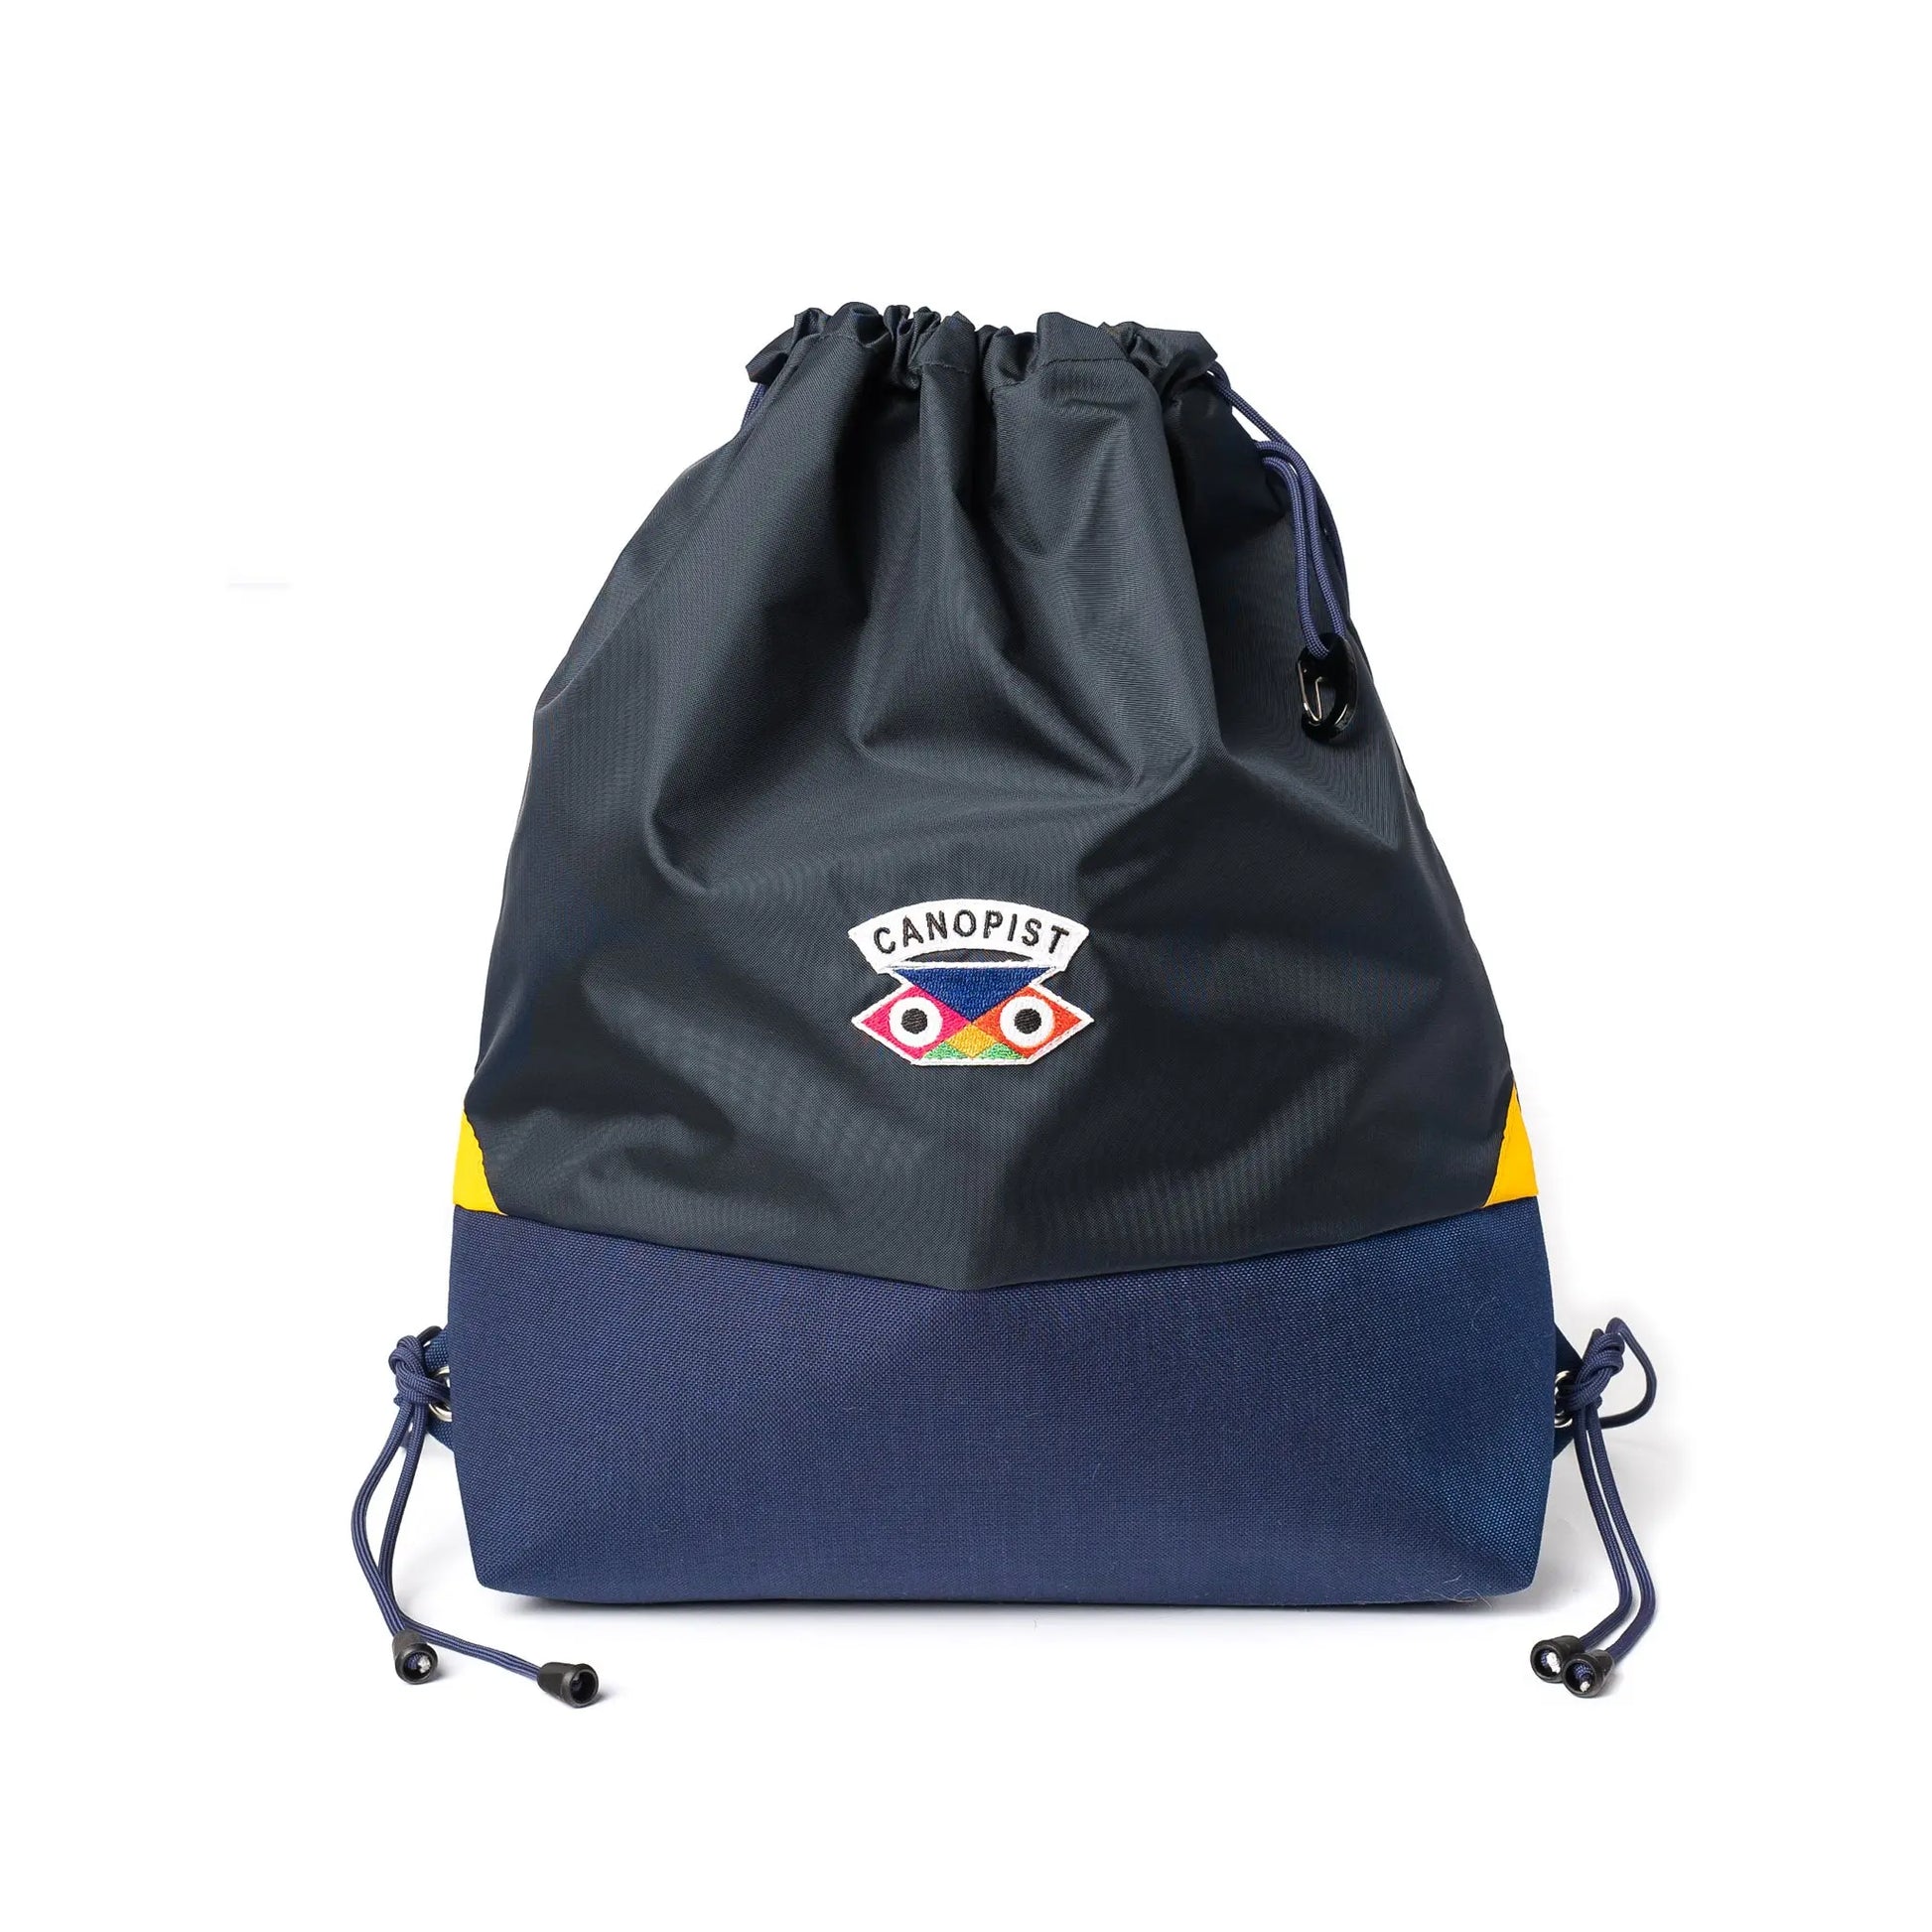 Canopist Drawstring Gym Backpack Canopist